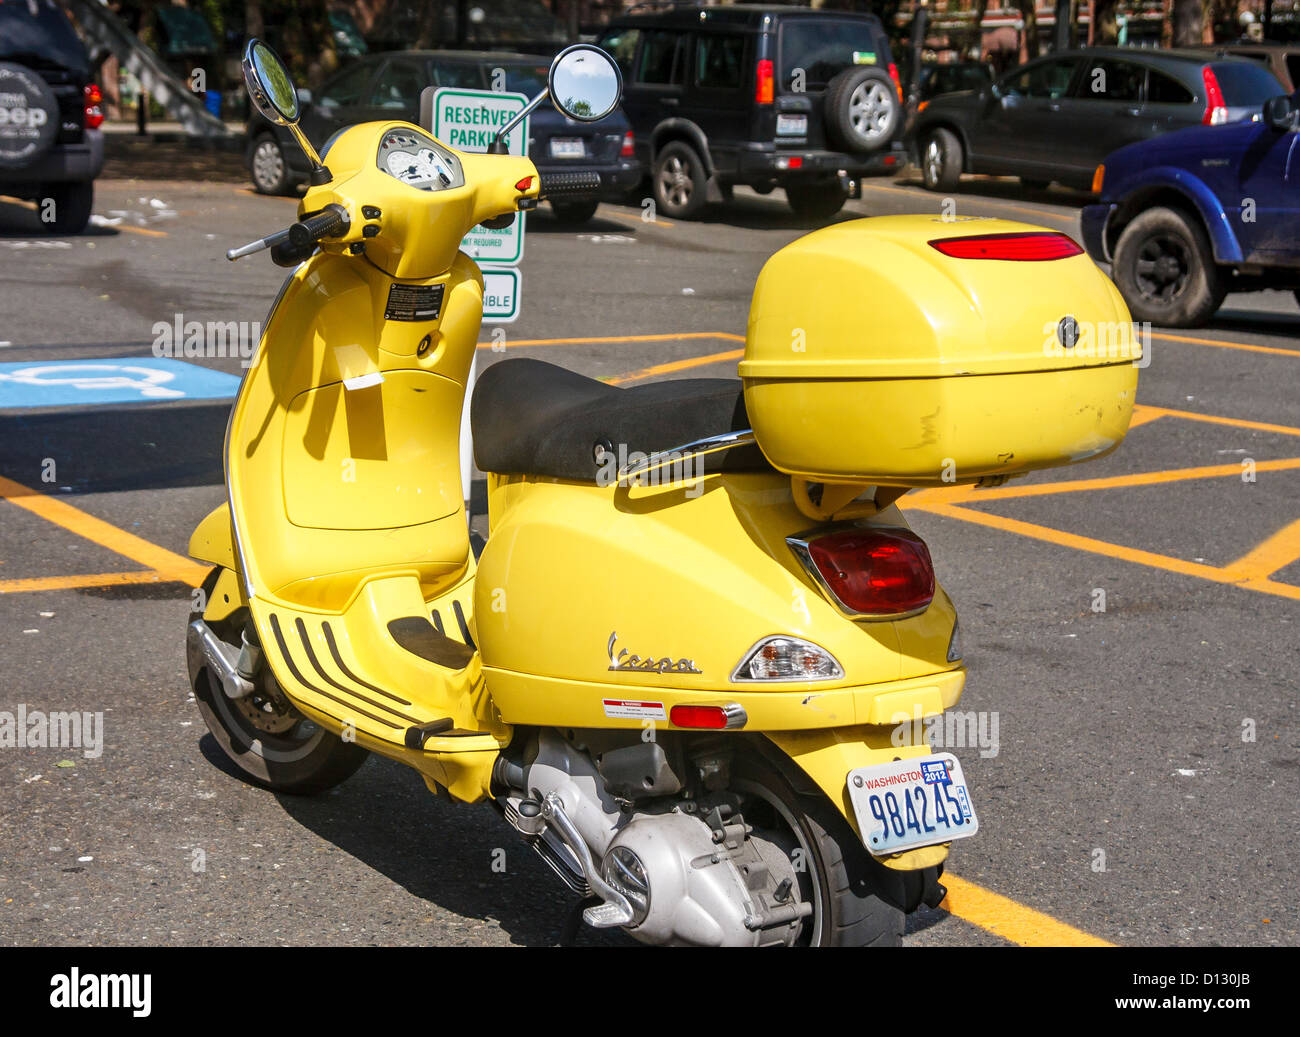 A yellow Vespa scooter in a parking lot Stock Photo